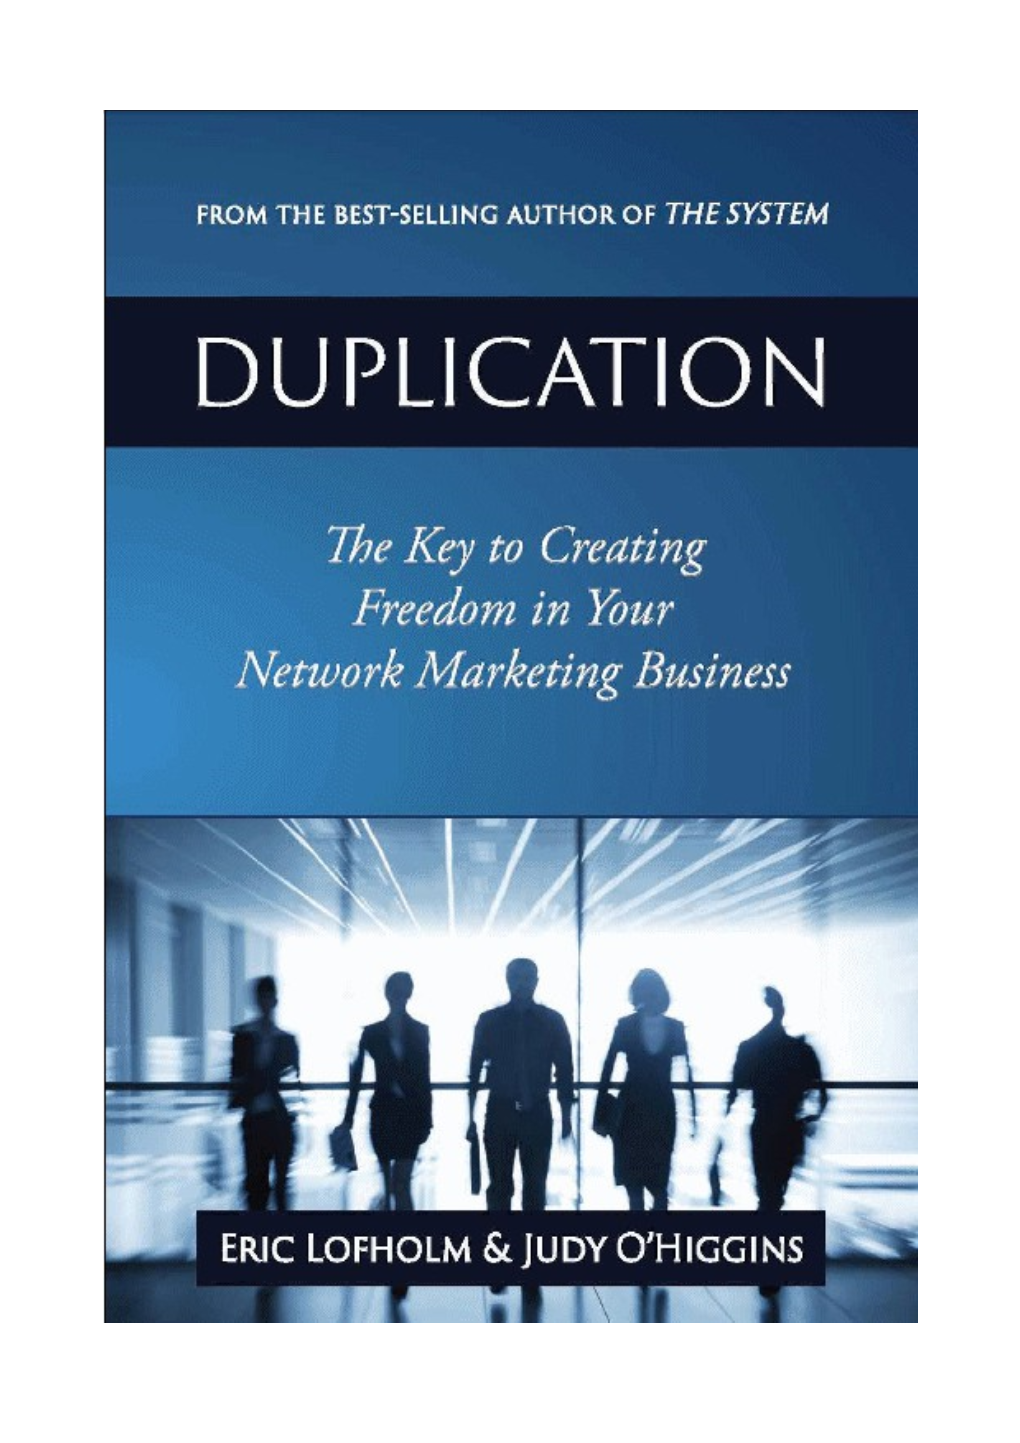 Part I: Duplication: the Key to Network Marketing Success (By Judy O'higgins) 6